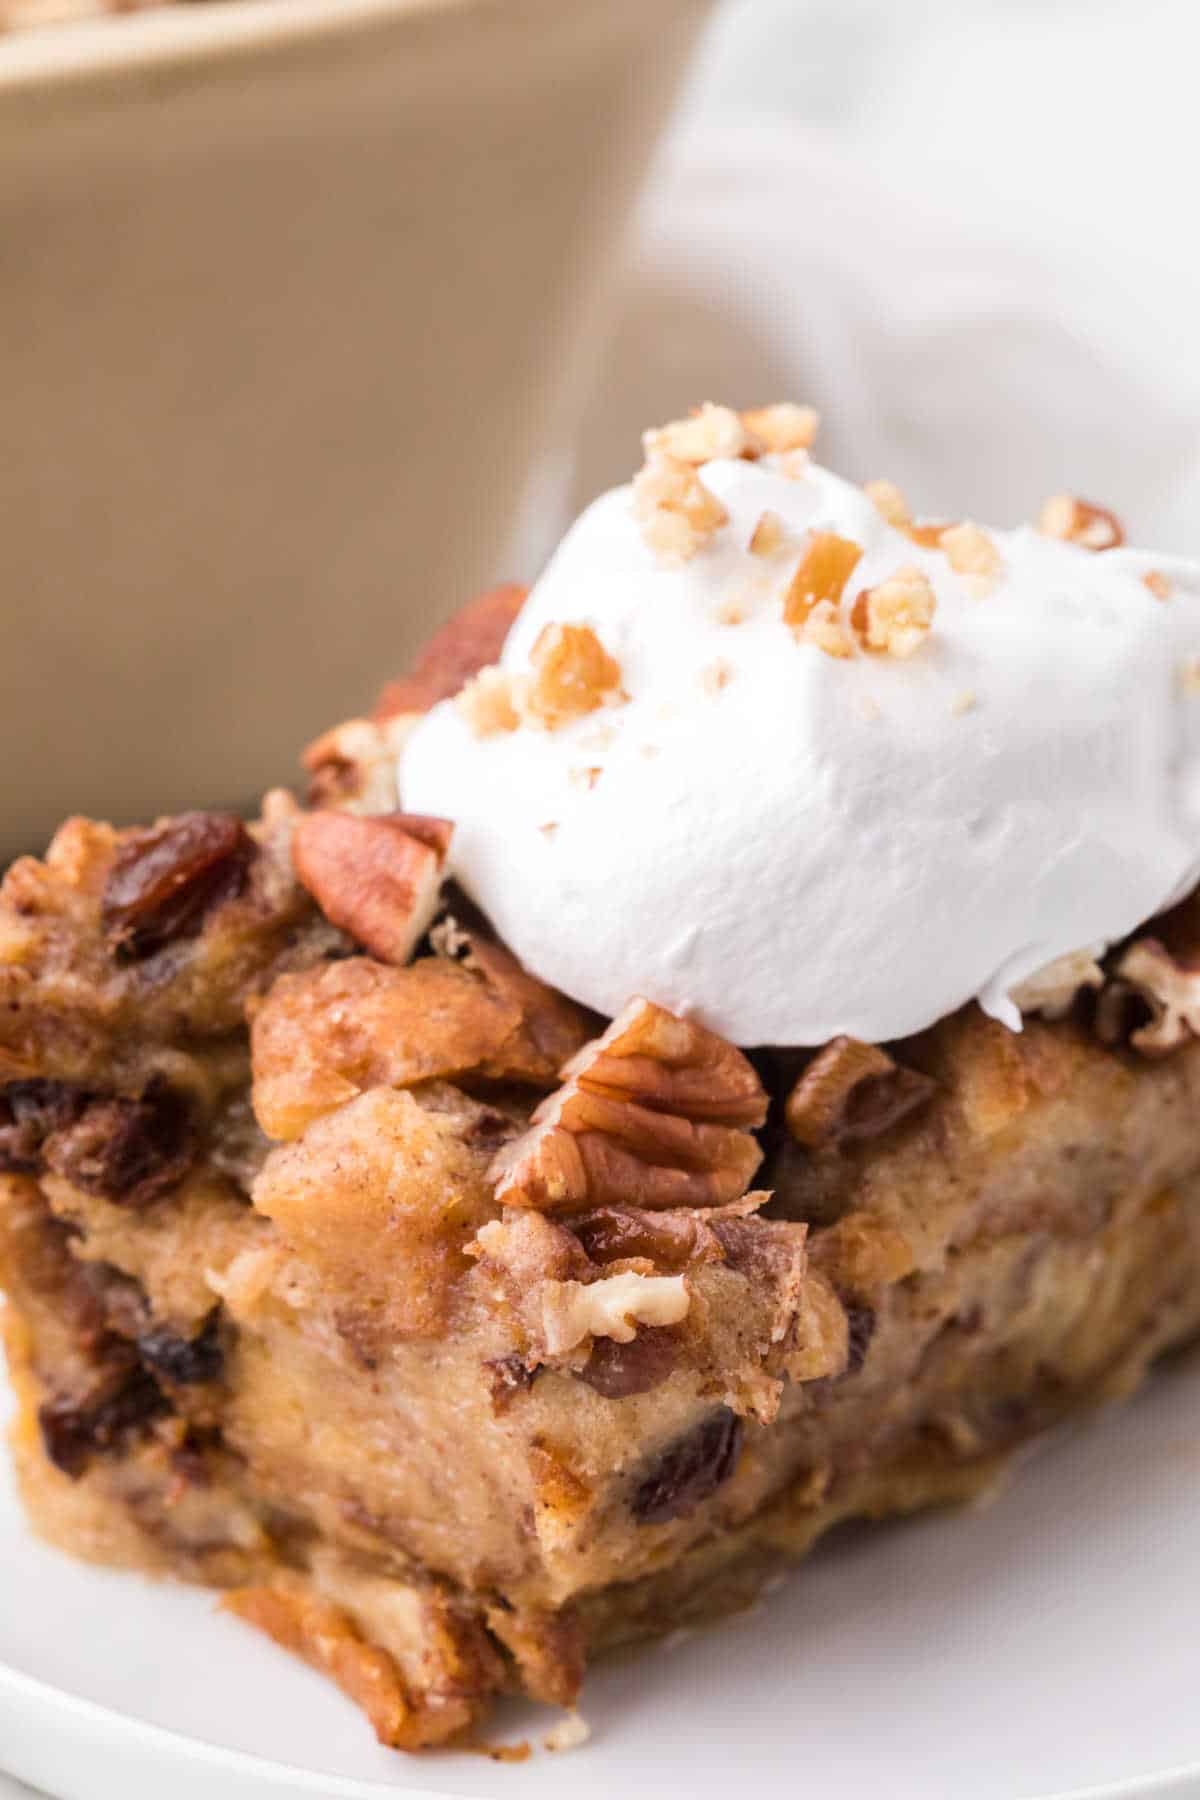 A slice of cinnamon raisin bread pudding on a plate topped with whipped cream.